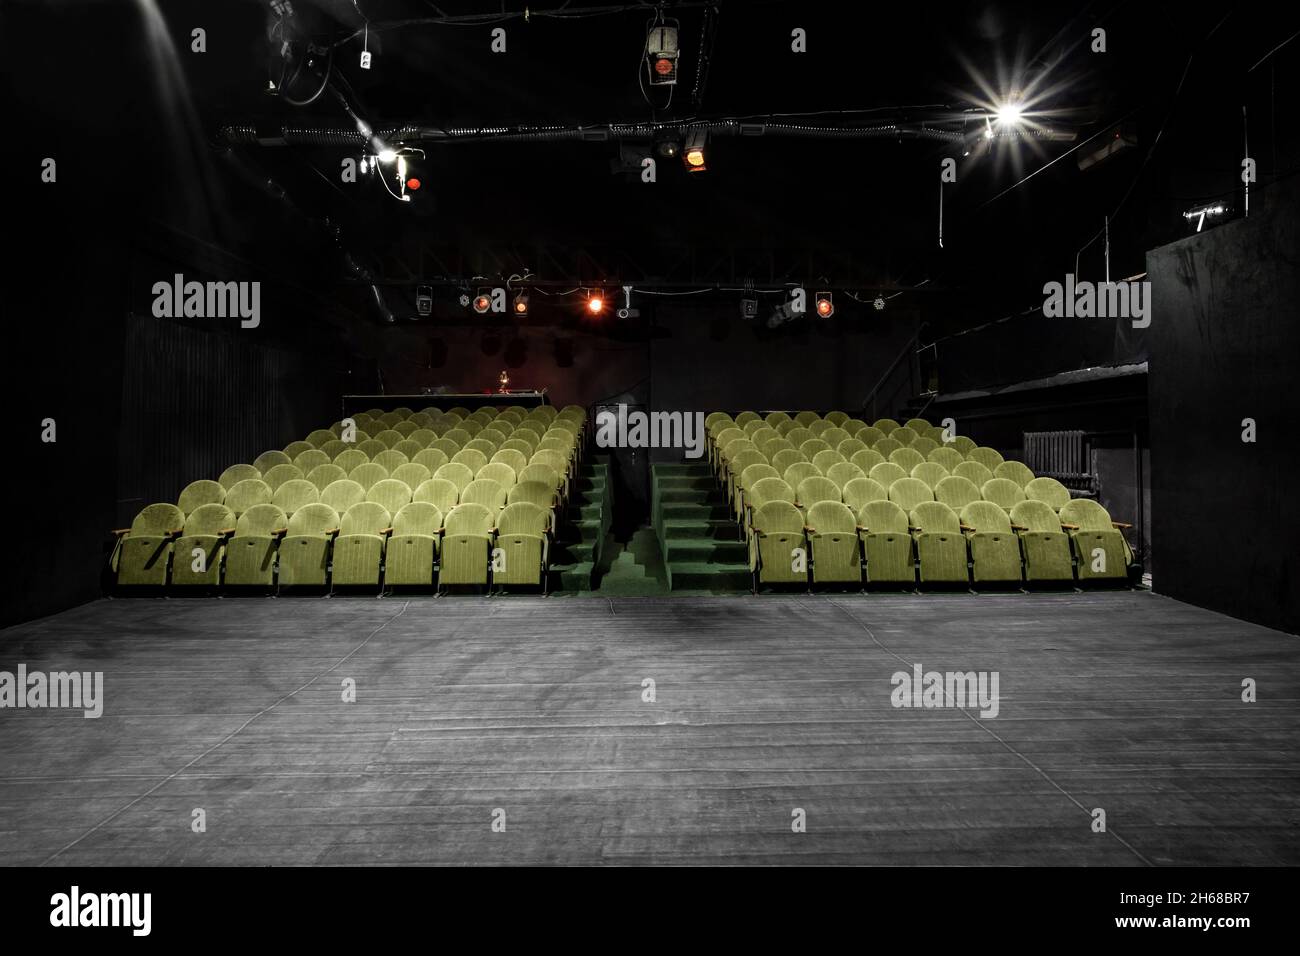 mage of a small auditorium with green armchairs Stock Photo